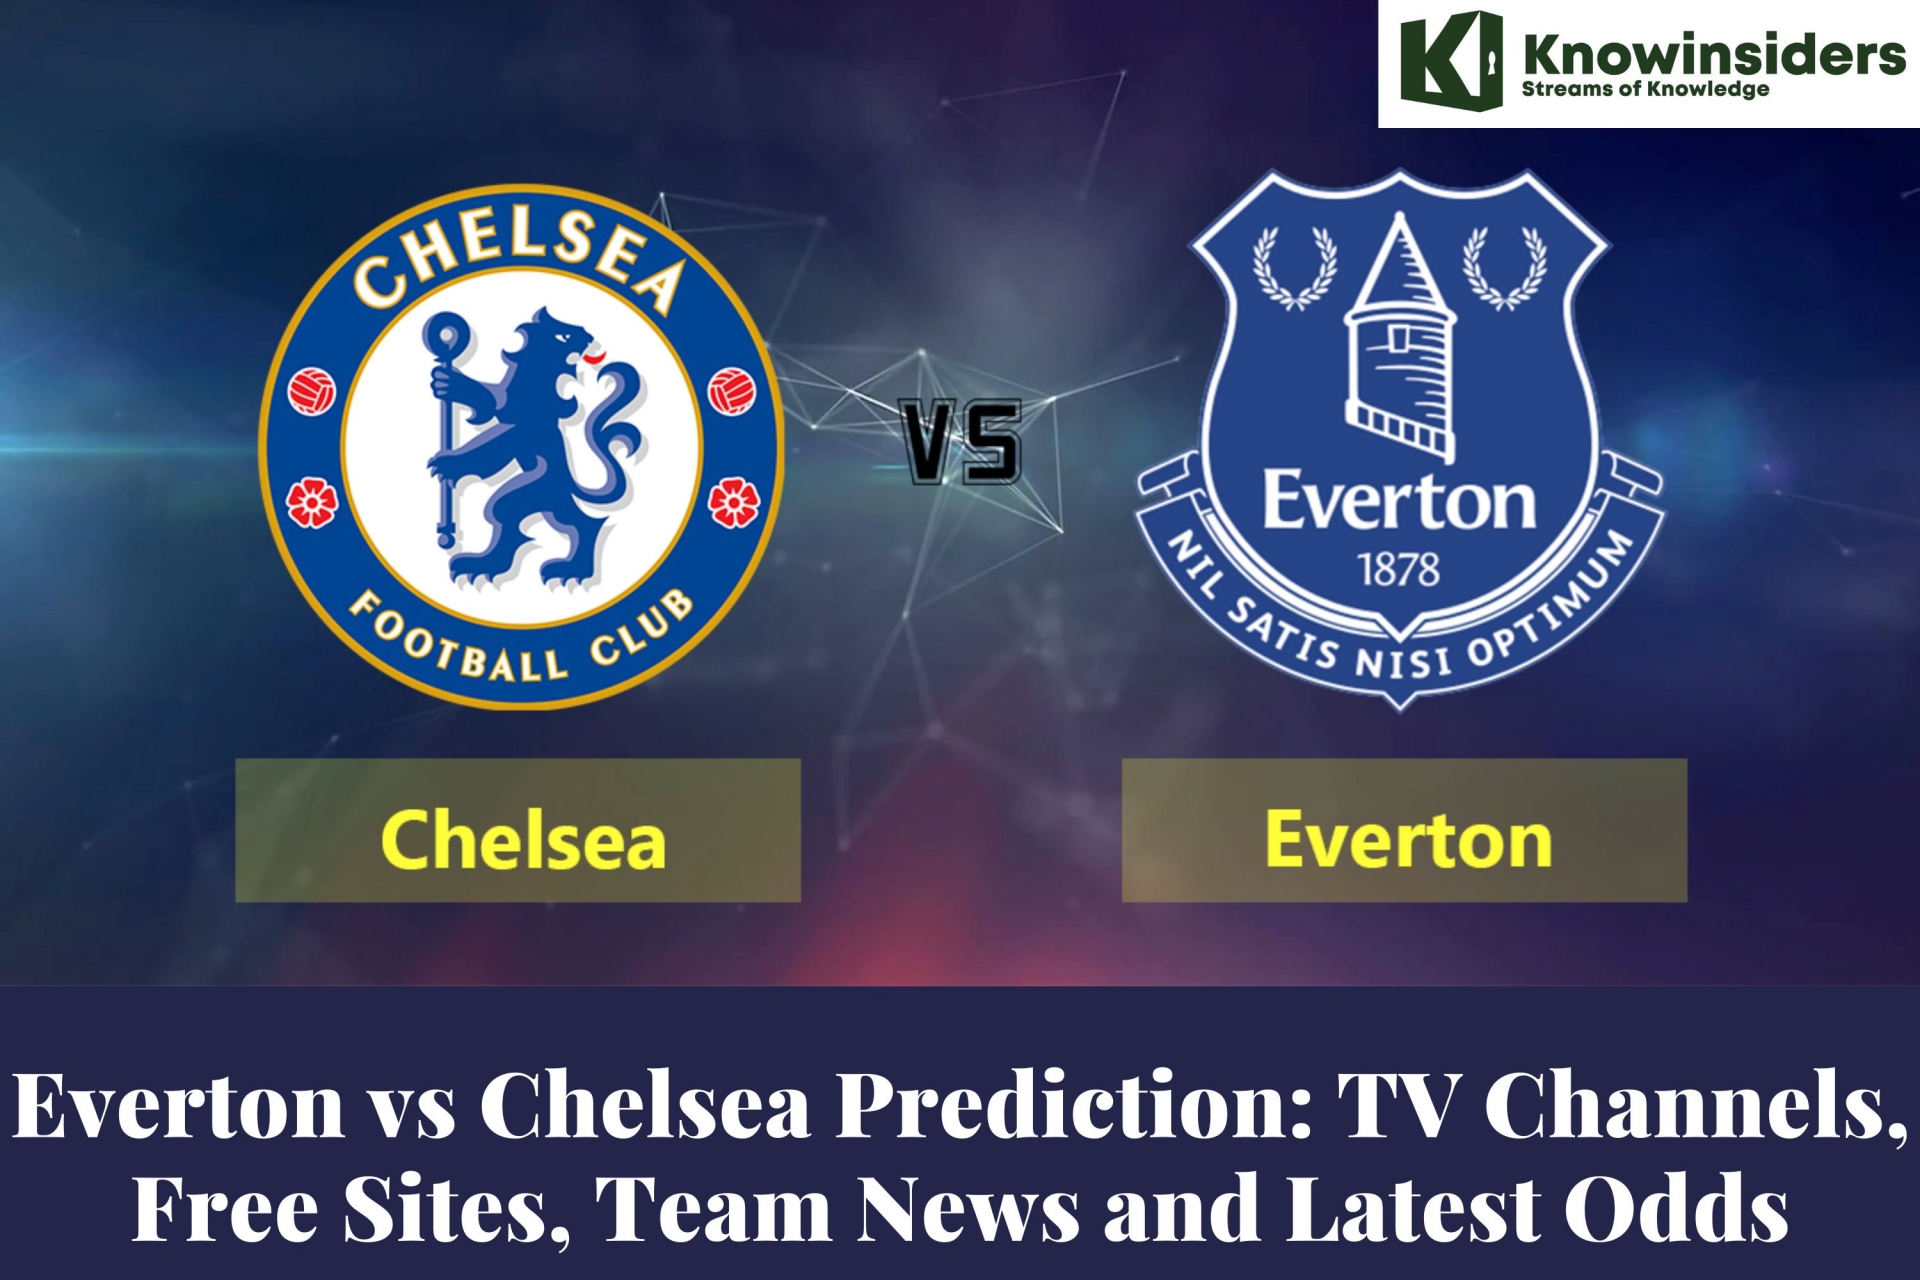 Everton vs Chelsea Prediction: TV Channels, Free Sites, Team News and Latest Odds